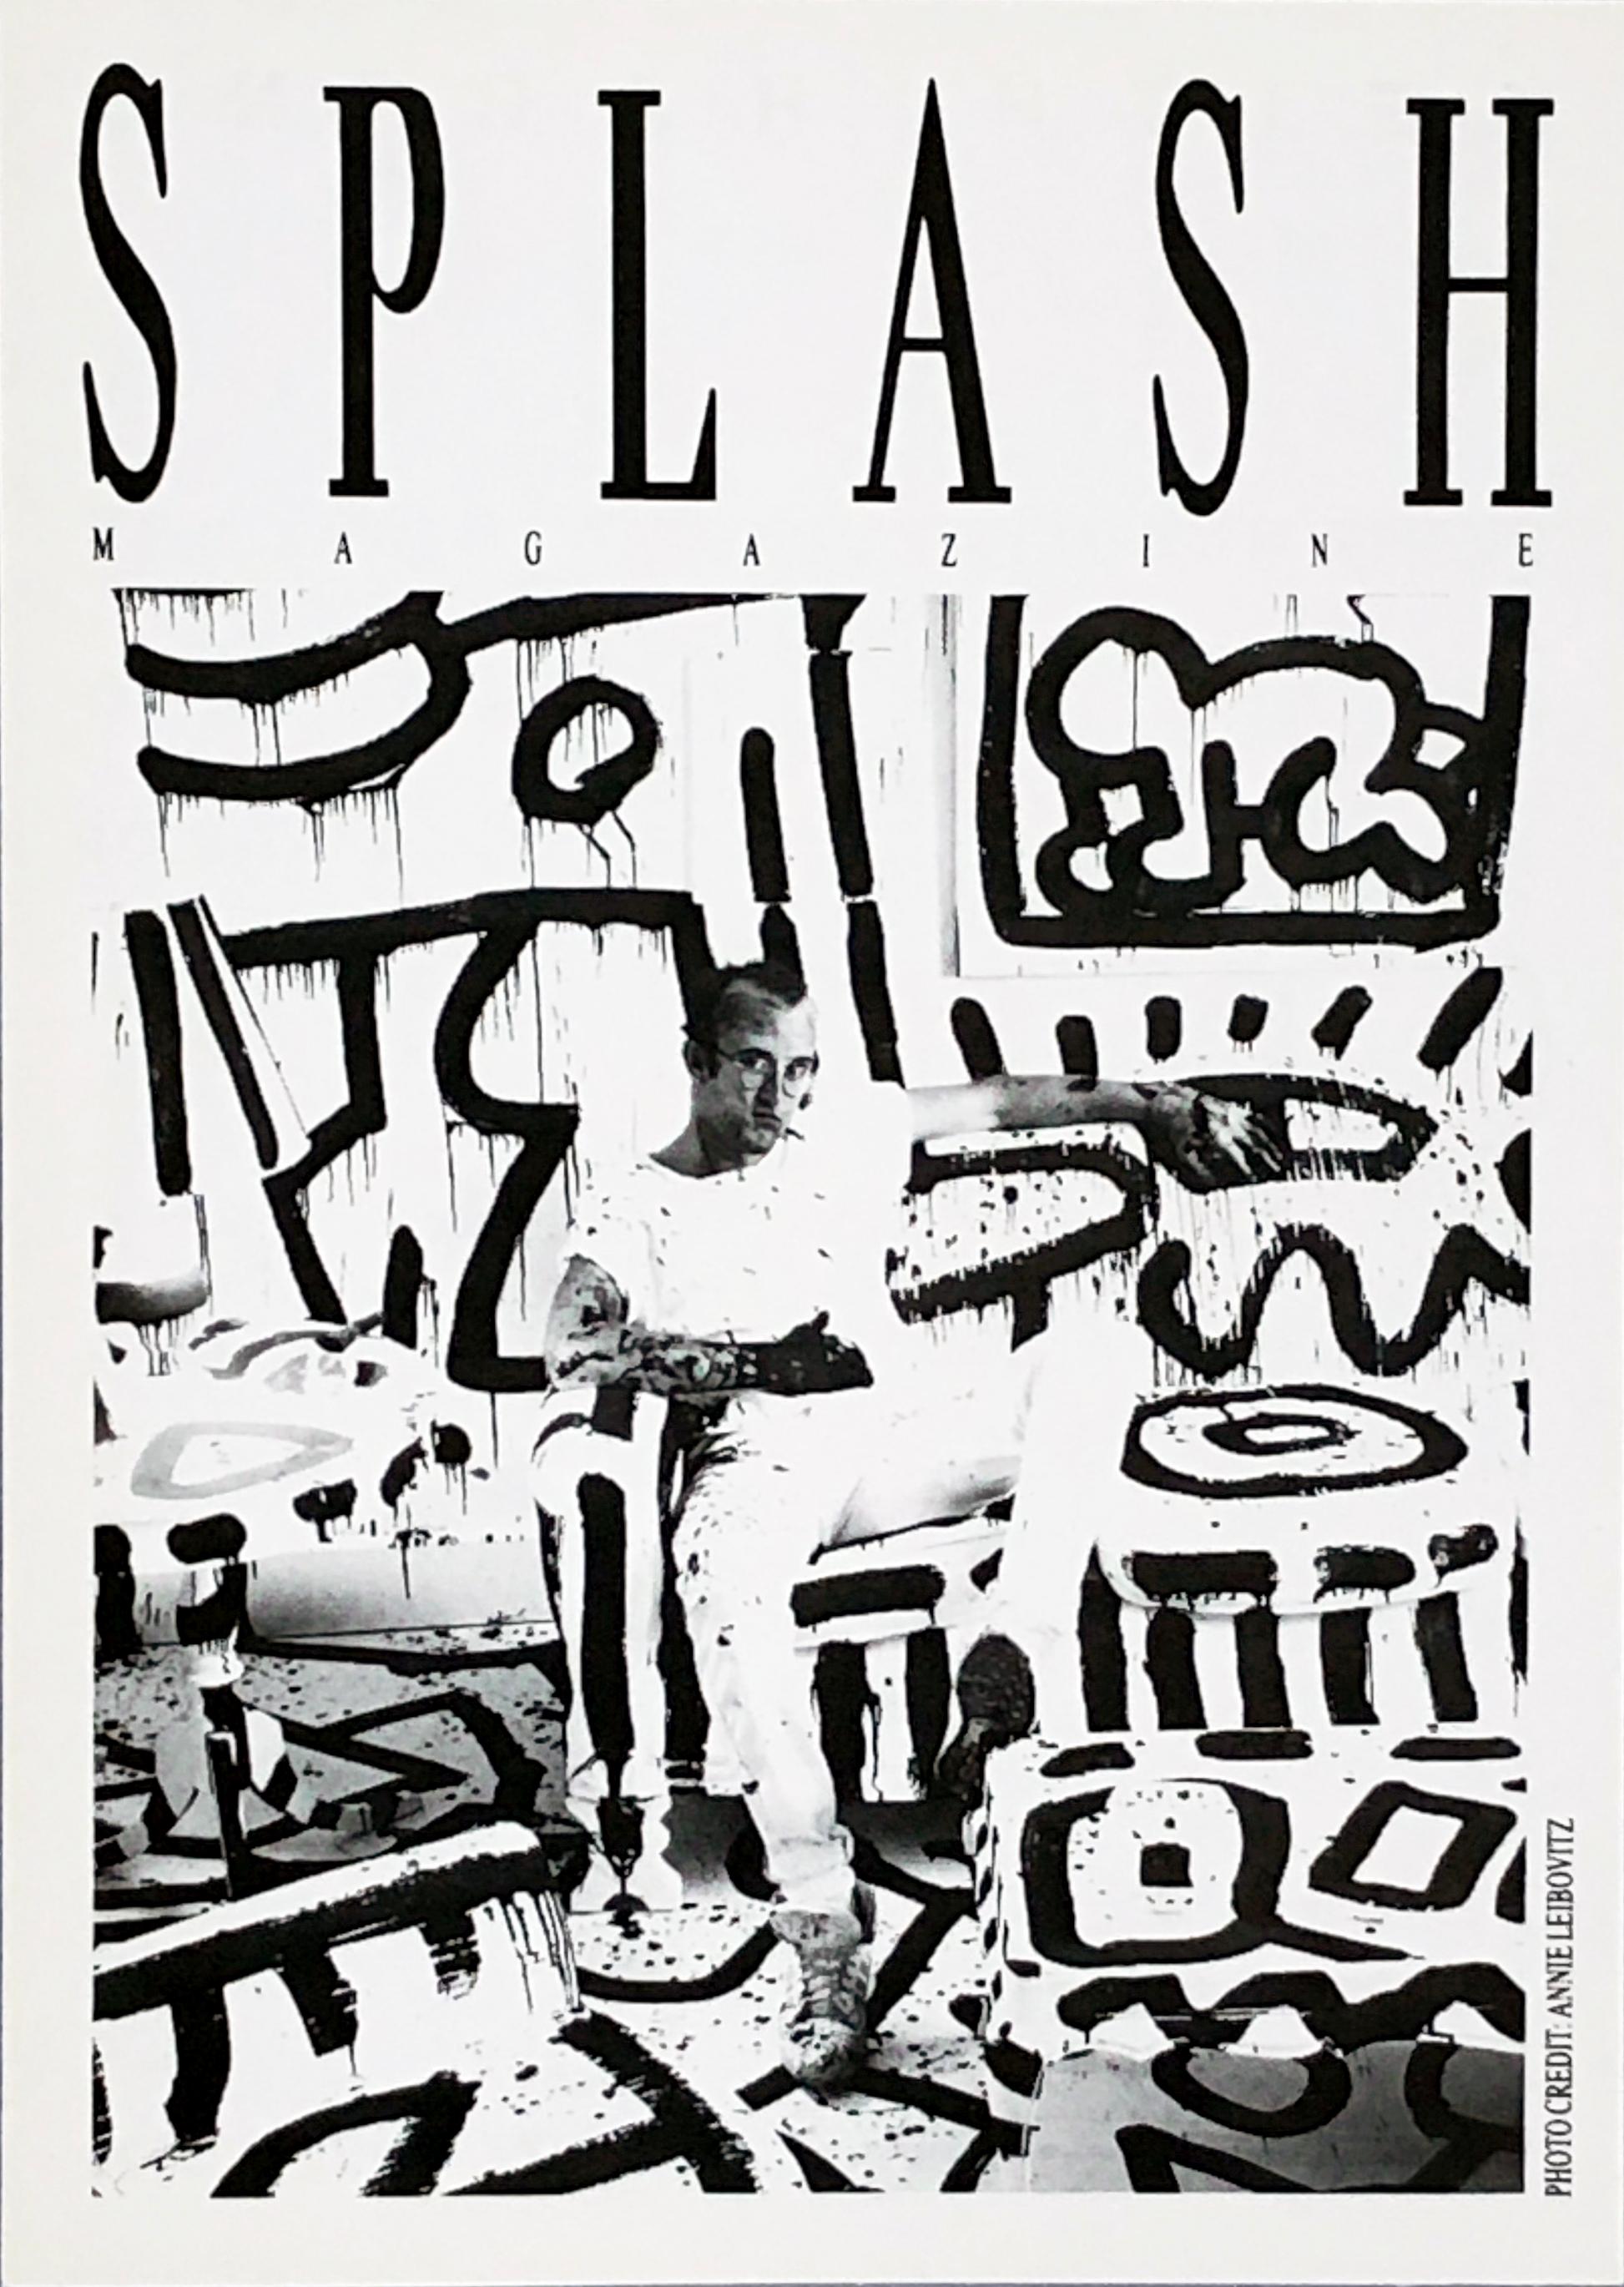 Keith Haring at Area Nightclub, New York, 1986:
Rare vintage 1986 announcement for a Splash Magazine event at the historic 1980s New York Area nightclub hosted by Keith Haring. Features a classic photo of Keith Haring in his studio that make for a